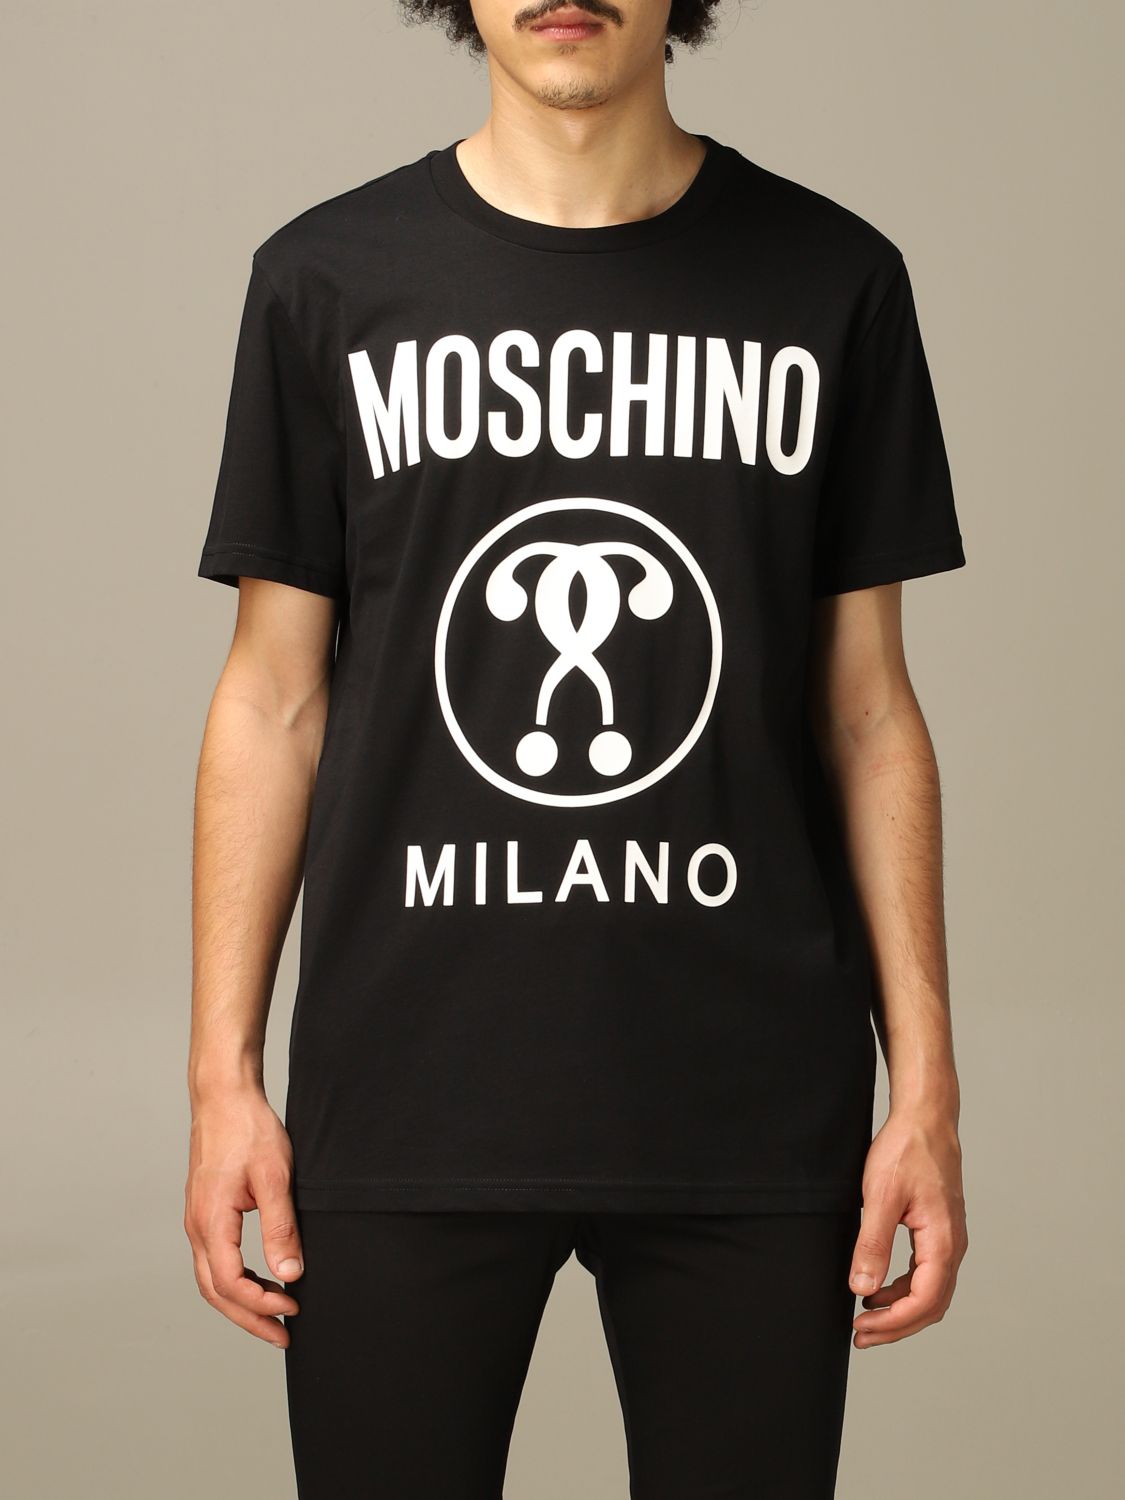 moschino outlet men's